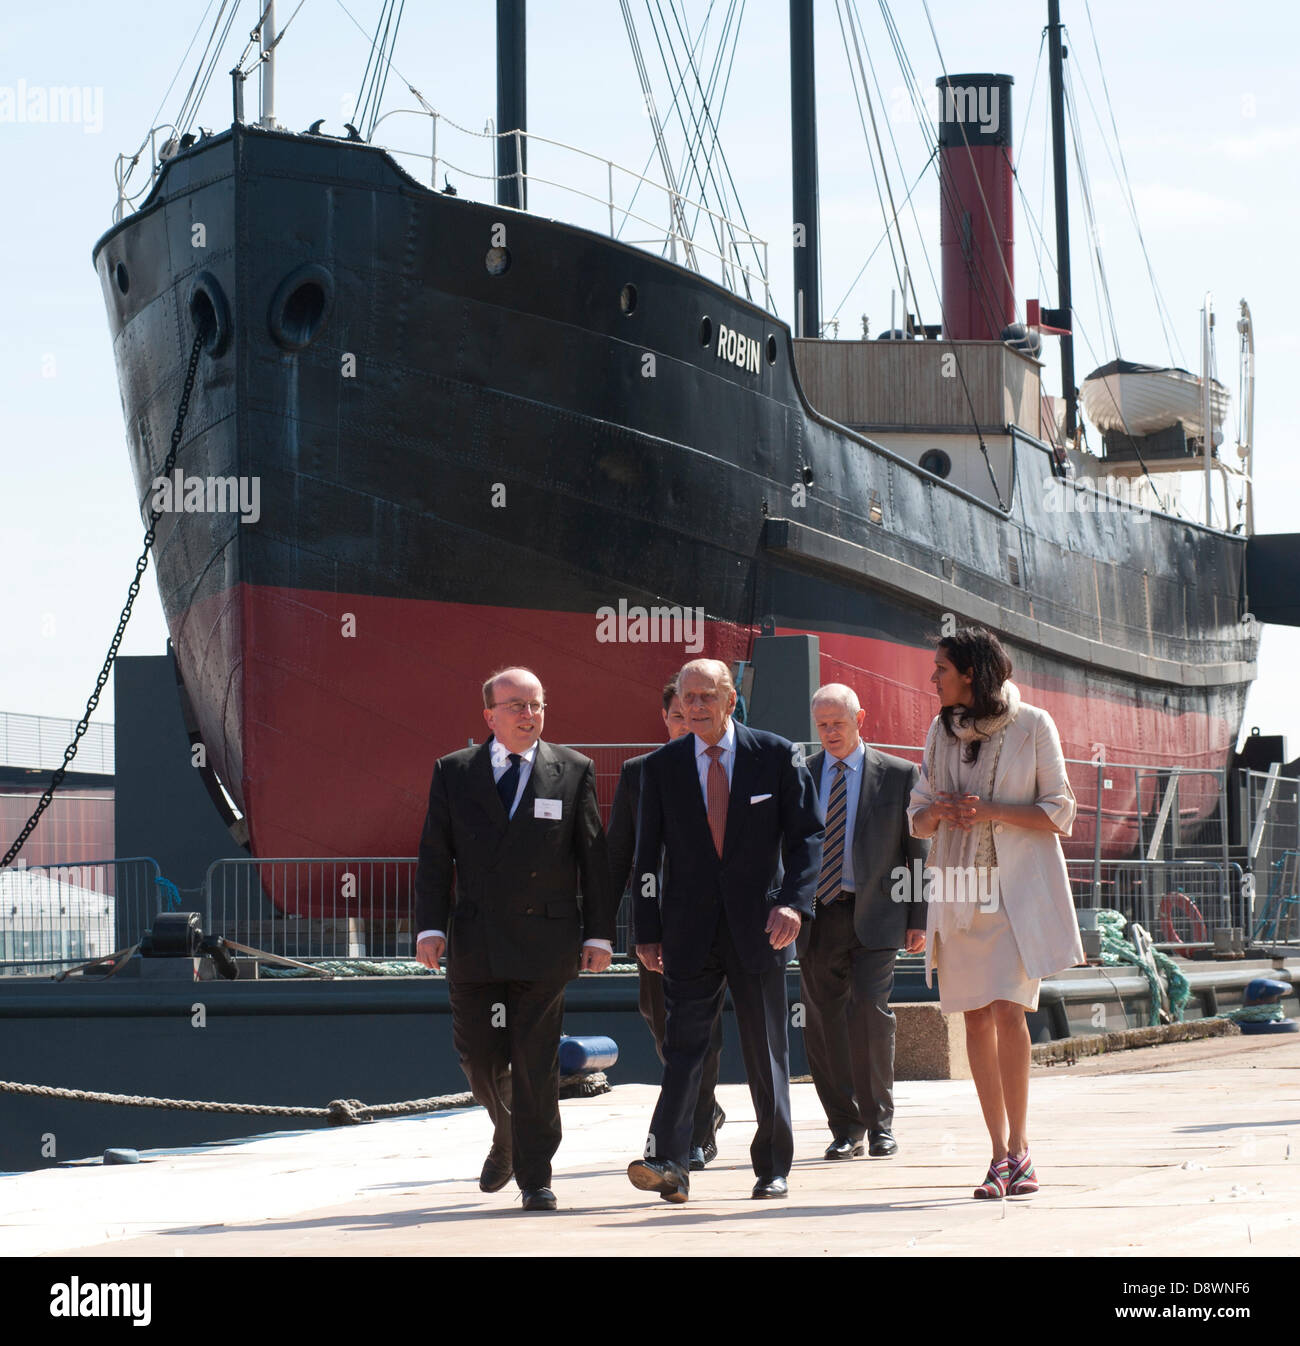 London, UK. 5th June, 2013. SS Robin, the world's oldest complete streamship visited by HRH Prince Philip the Honorary Member of the SS Robin trust, who will be 92 on June 10th 2013. Prince Philip only a few days short of his 92nd birthday paid a visit to the SS Robin at the launch of 'Open Doors' the final phase of a 5 year £3 Million restoration project masterminded by David and Nish Kampfner sear £3 Million restoration project masterminded by David and Nish Kampfner seen here on right in white. the SS Robin is berthed at London Victoria docks for final fitting out.  © BRIAN HARRIS/Alamy Liv Stock Photo